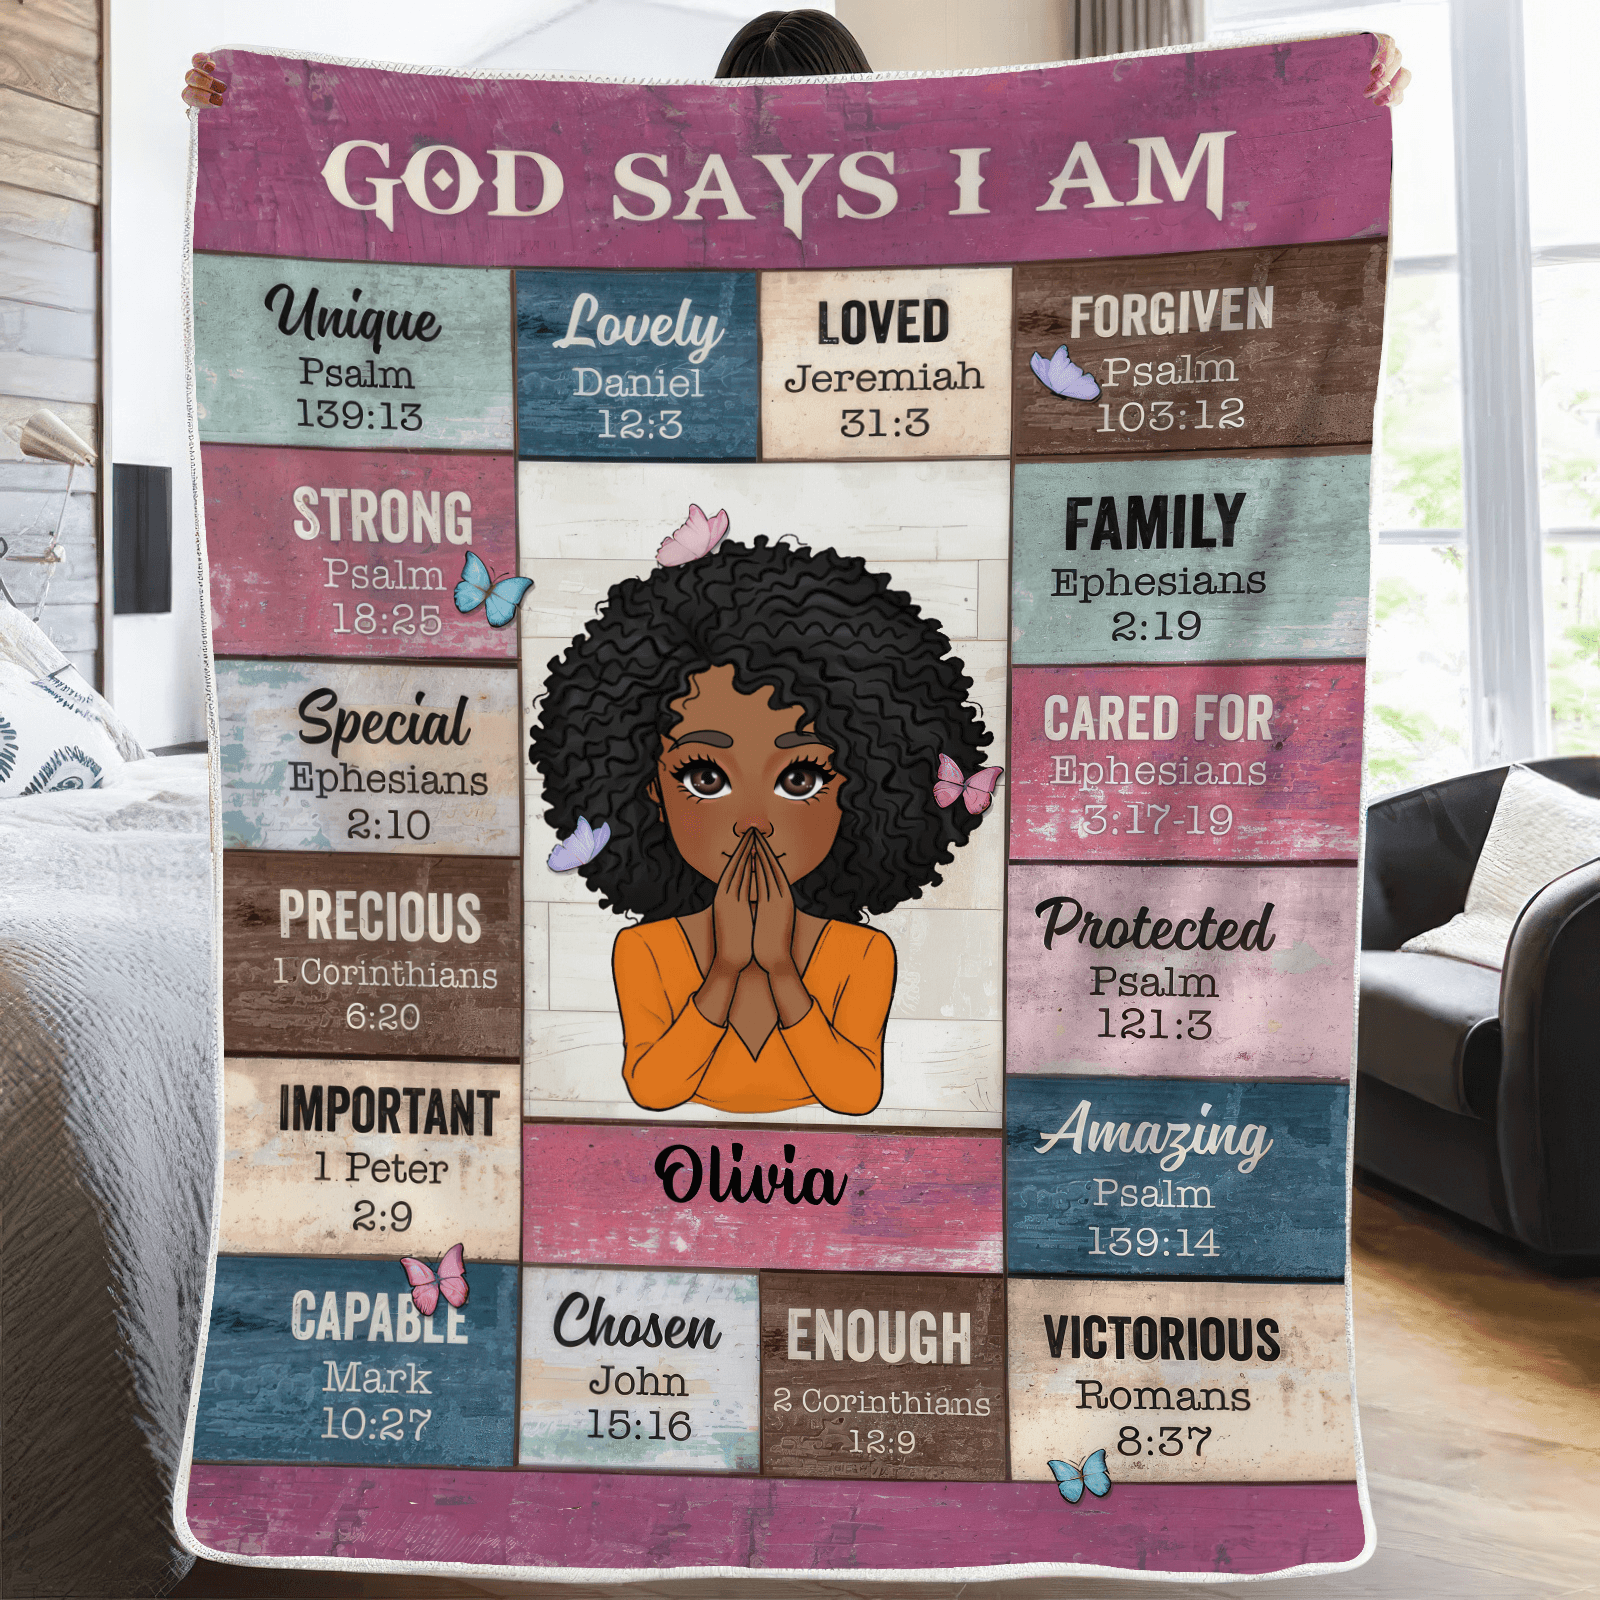 God Says I Am - Personalized Blanket - Gift for Black Woman, Sister, Mother, Friends, or Mentor, African American, Black History Month, Juneteenth | Blanket - Suzitee Store